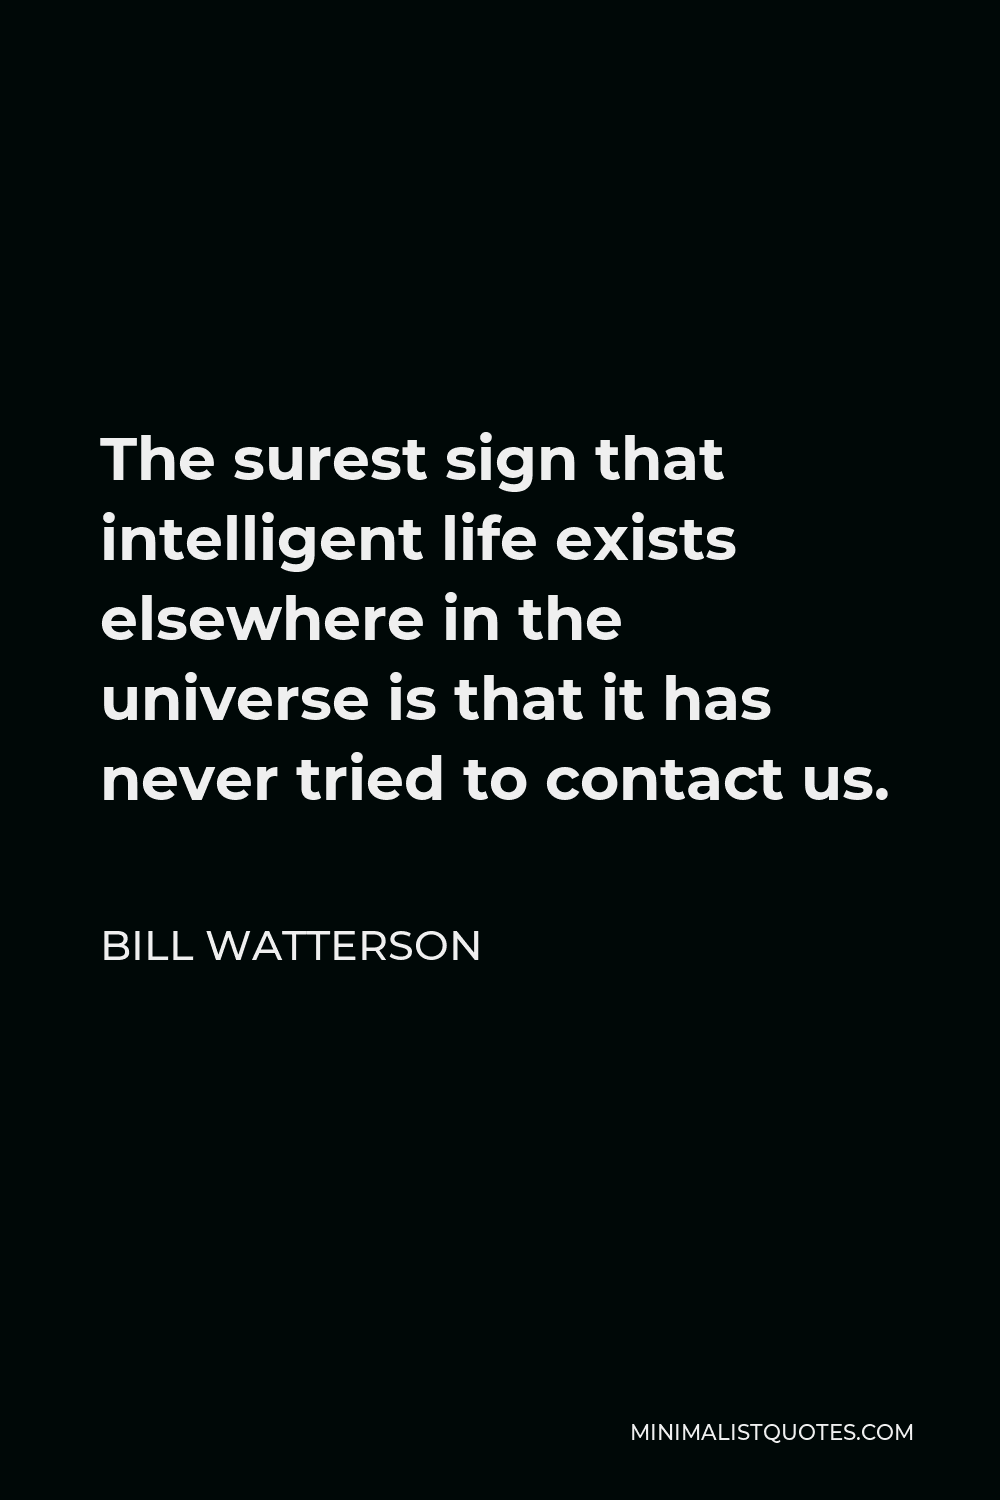 Bill Watterson Quote - The surest sign that intelligent life exists elsewhere in the universe is that it has never tried to contact us.